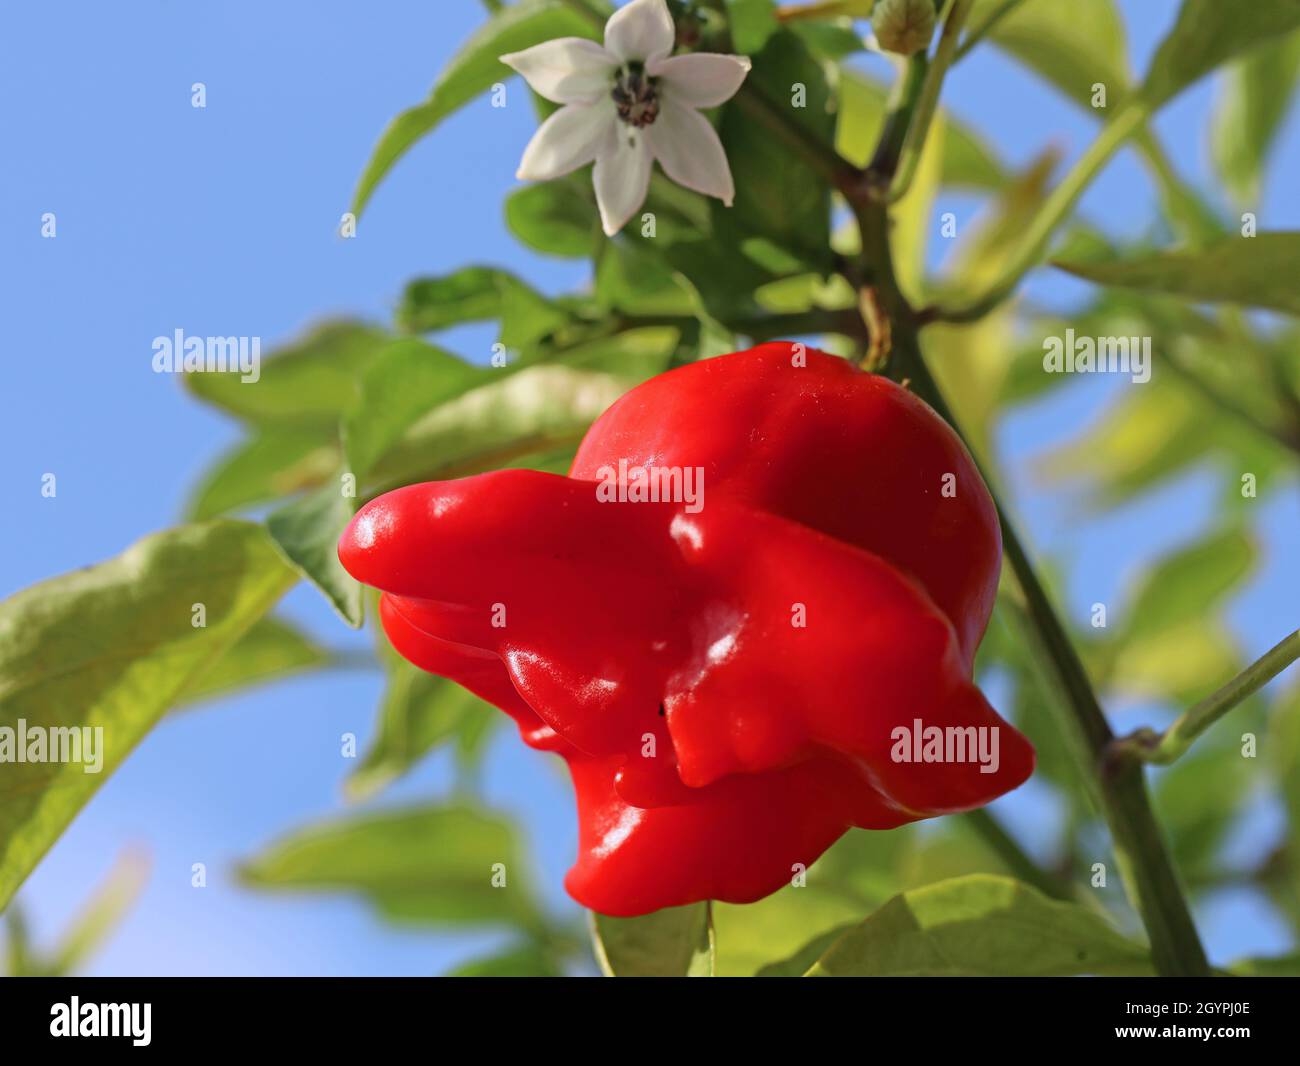 Bishops Crown chili pepper, capsicum baccatum, on plant with blue sky background Stock Photo